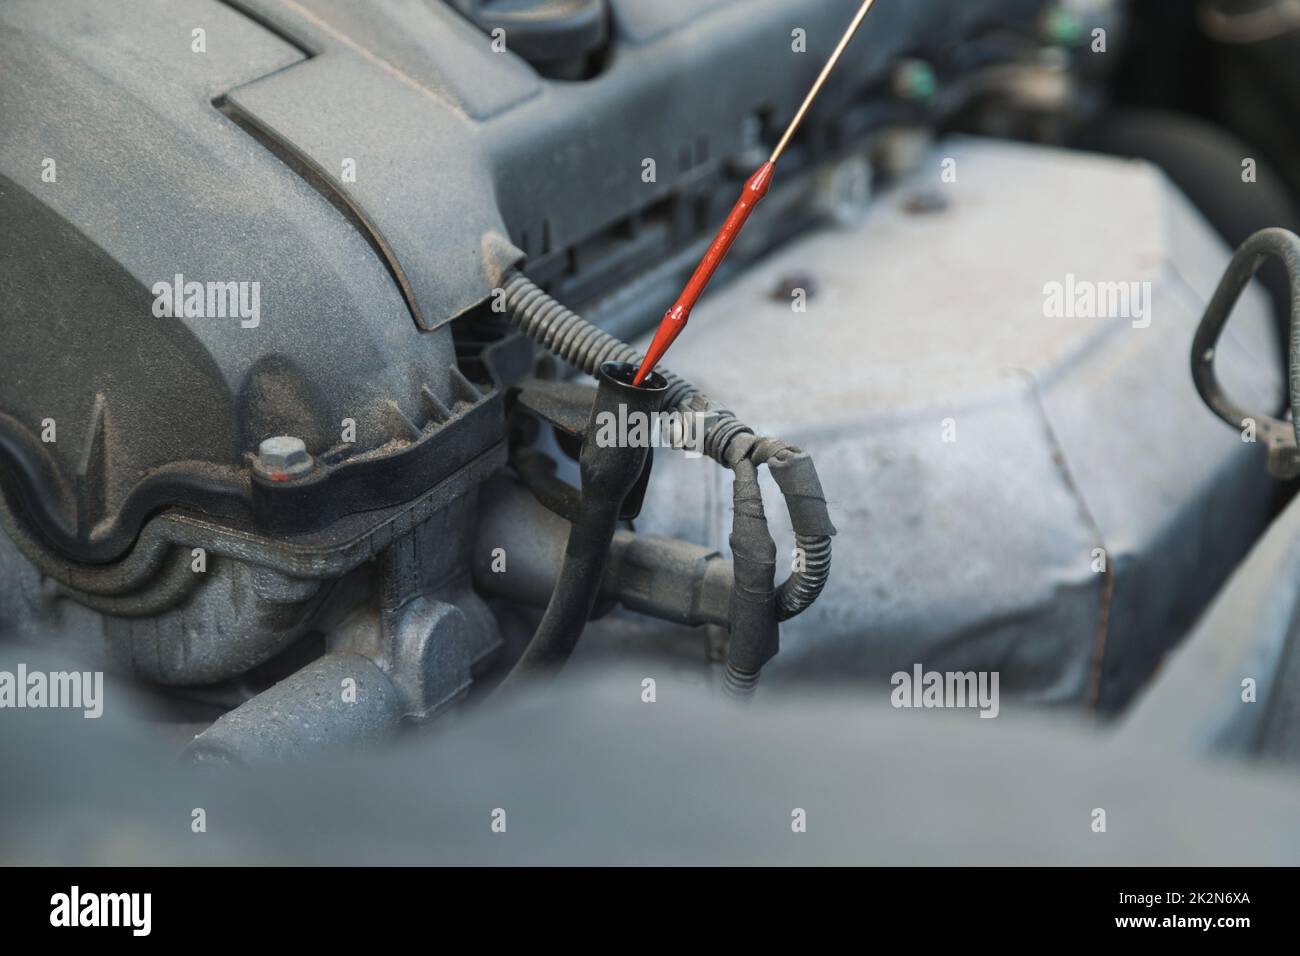 Serviceman takes out a dipstick to check the oil level in the car engine. Stock Photo